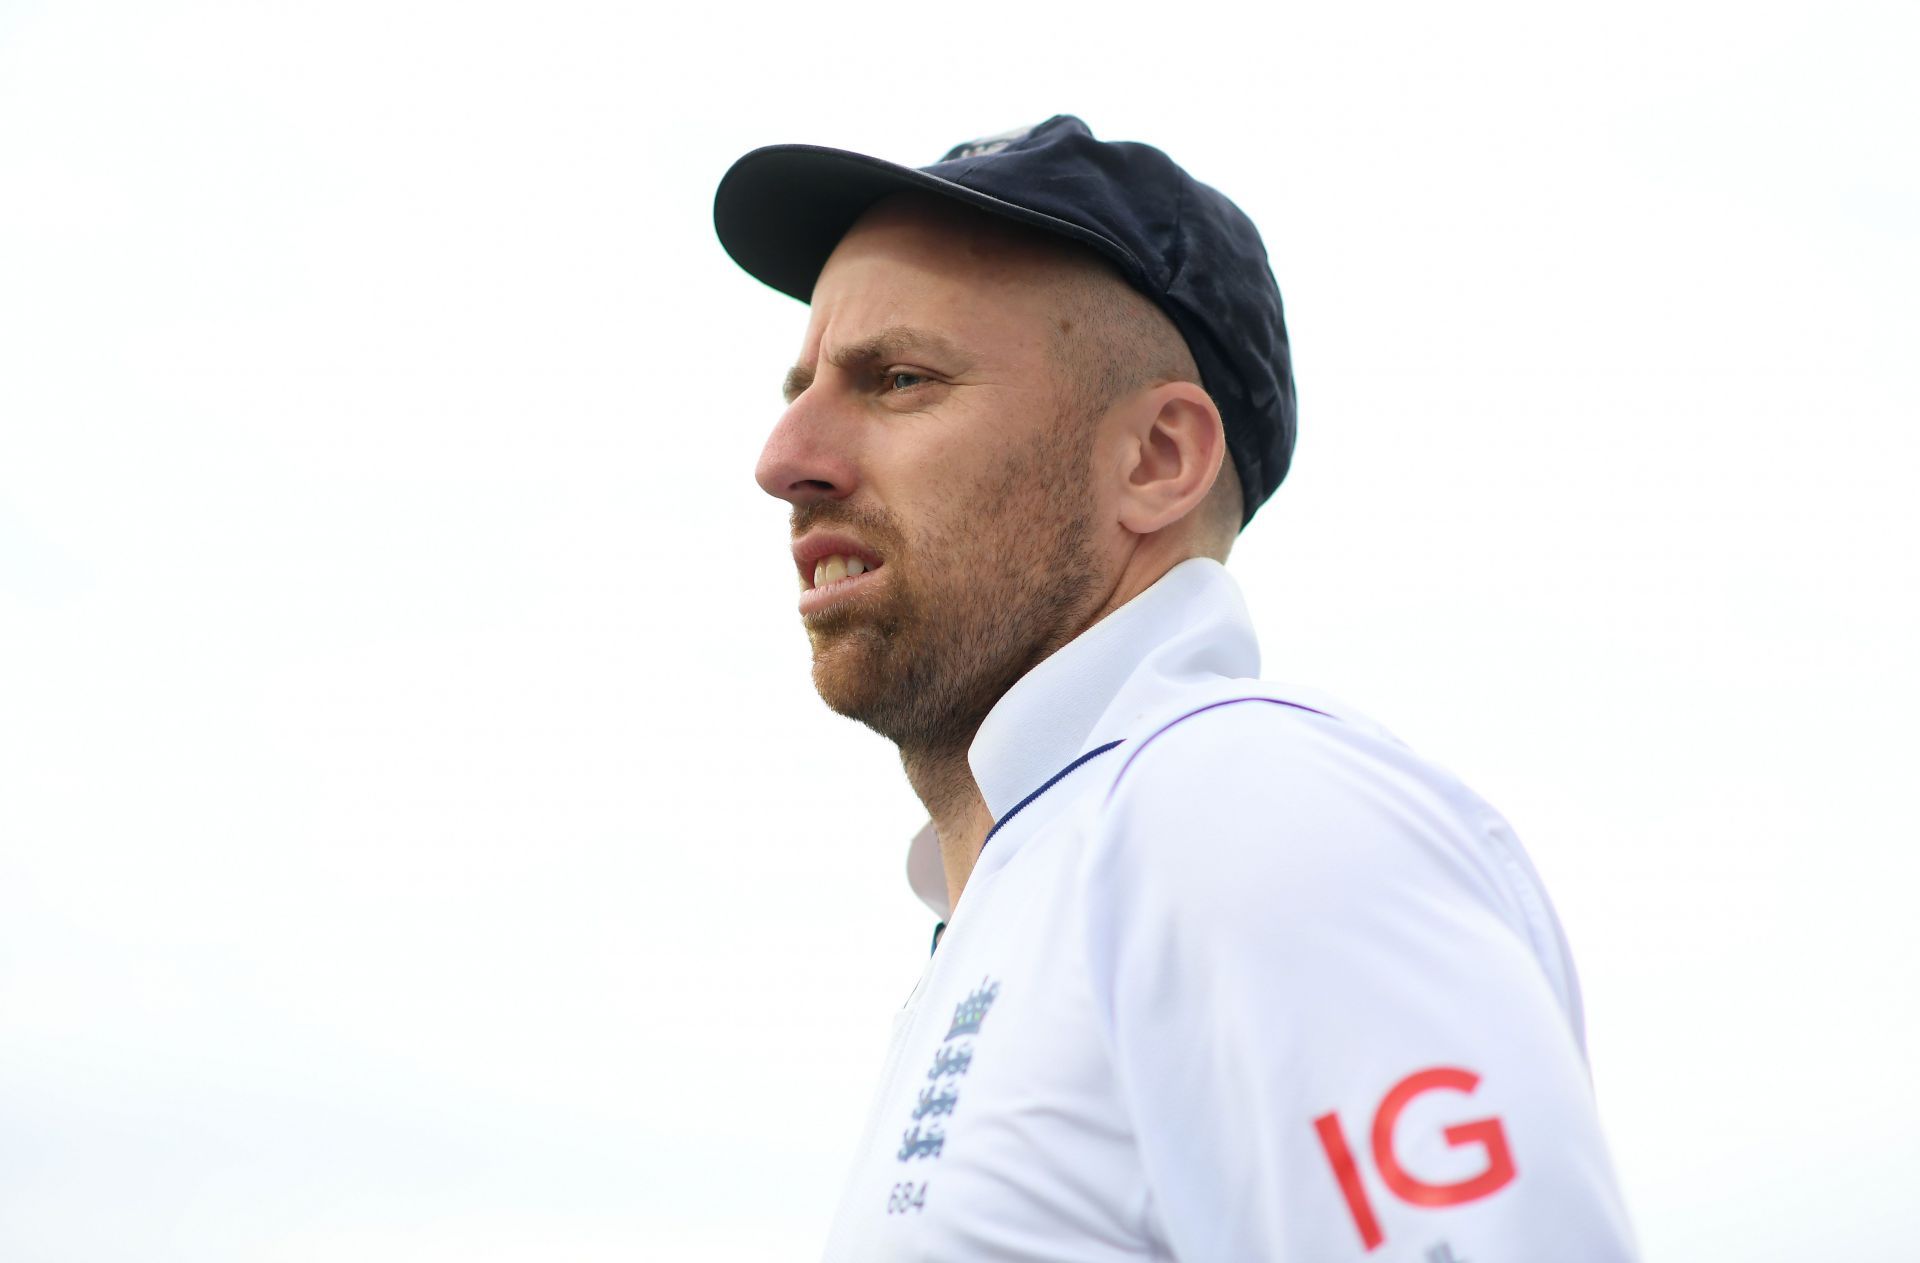 Jack Leach picked up two wickets. (Image Credits: Getty)